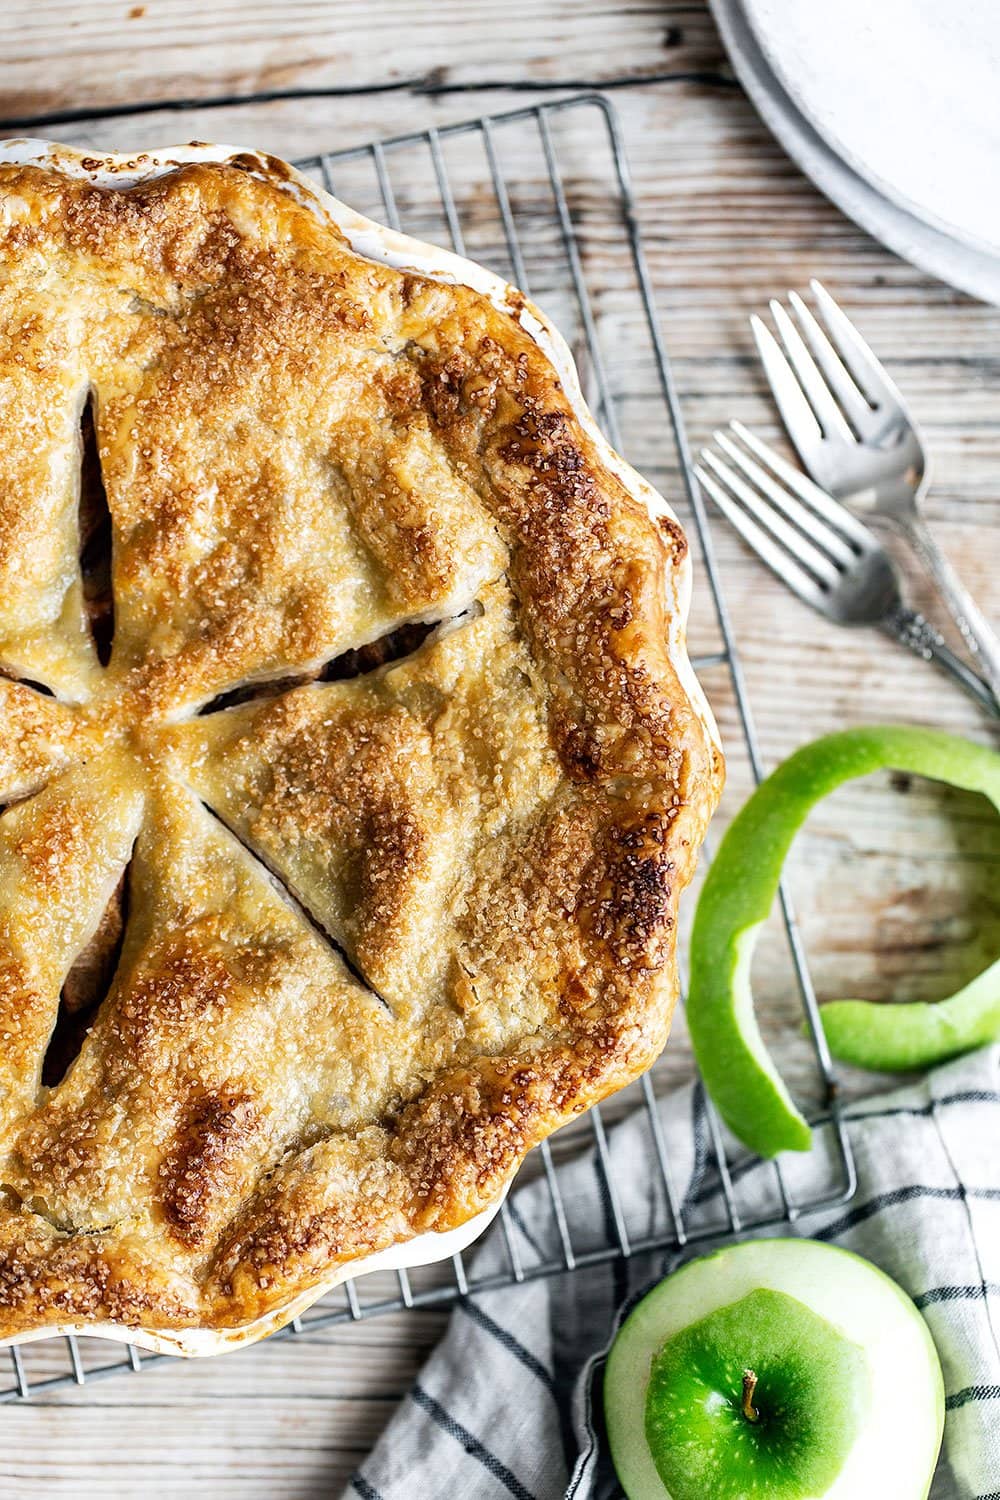 Golden brown apple pie on a wooden table